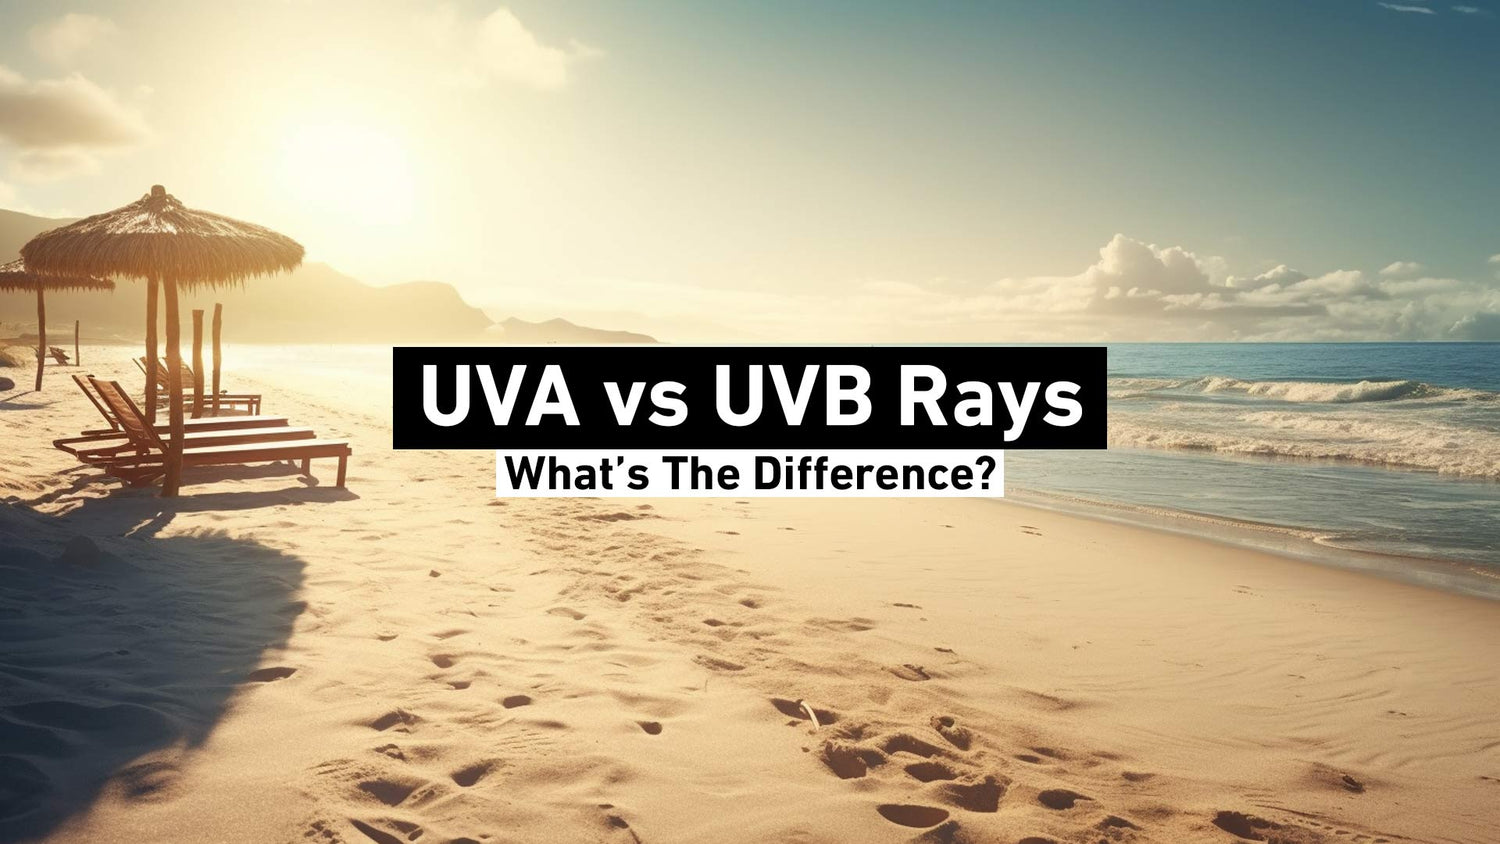 What's the Difference Between UVA and UVB Rays?